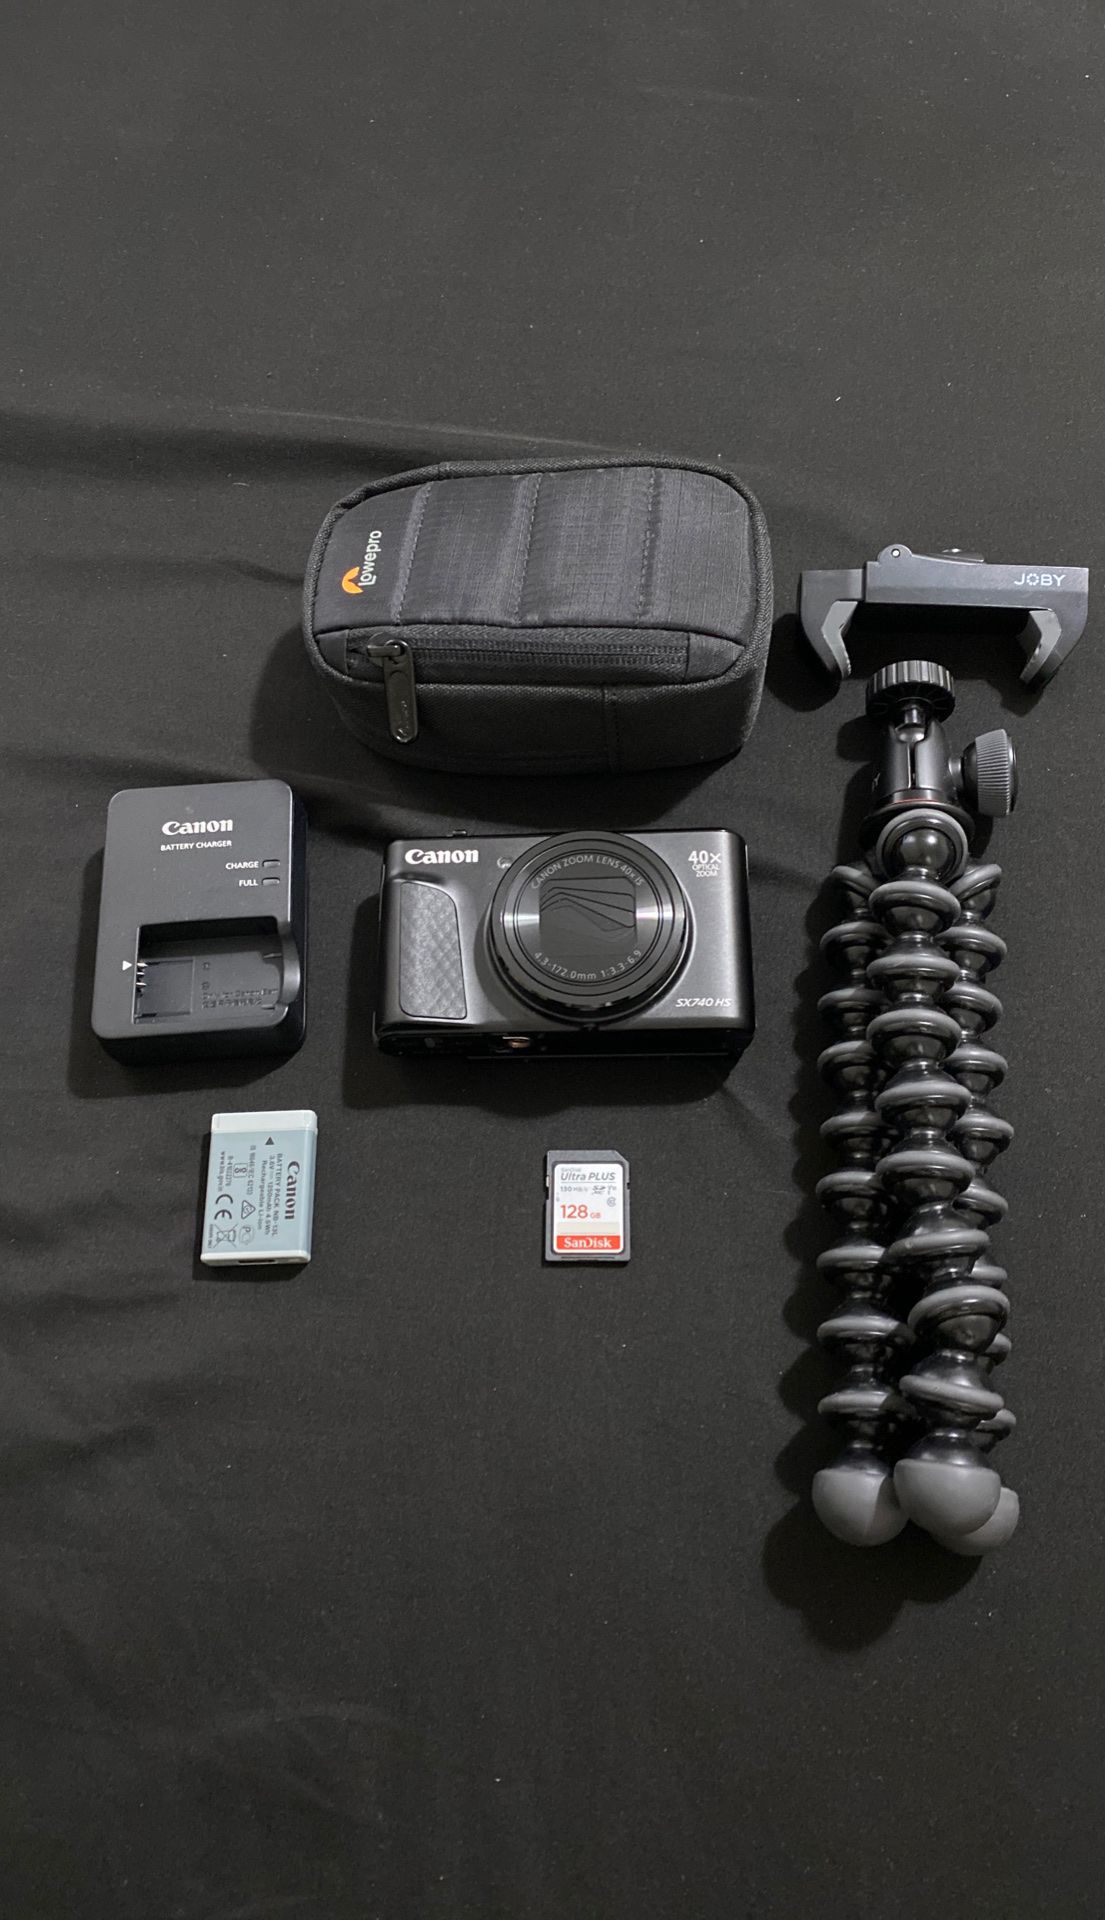 Canon SX740 HS camera with 1 battery with charger, Ultra PLUS 128 GB SanDisk SIM card, Joby gorilla tri-pod, and Lowepro camera bag